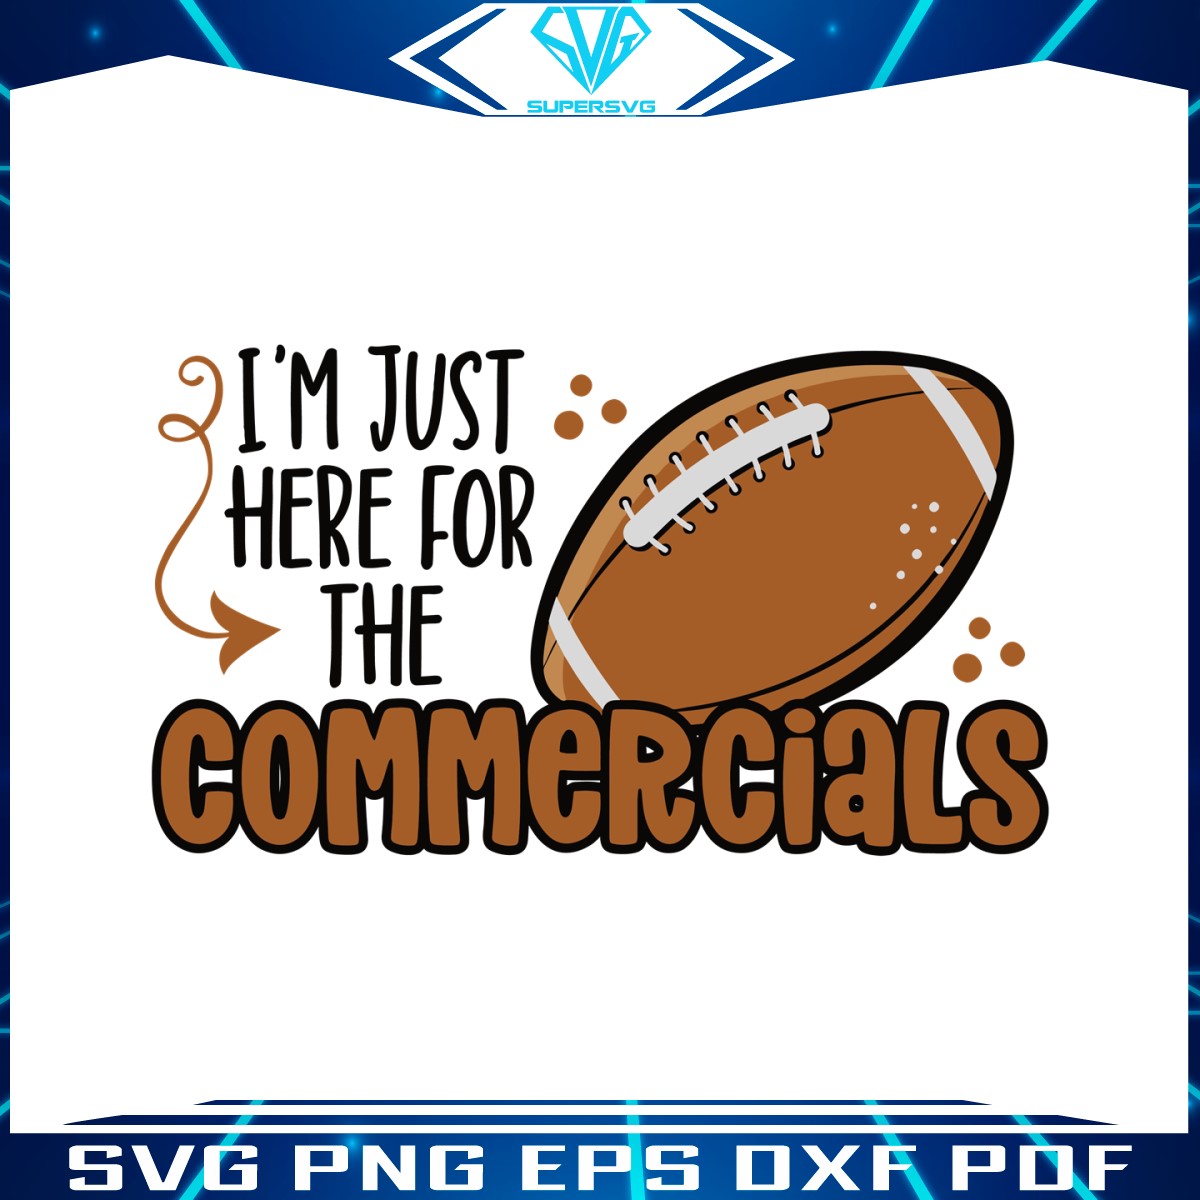 im-just-here-for-the-commercials-svg